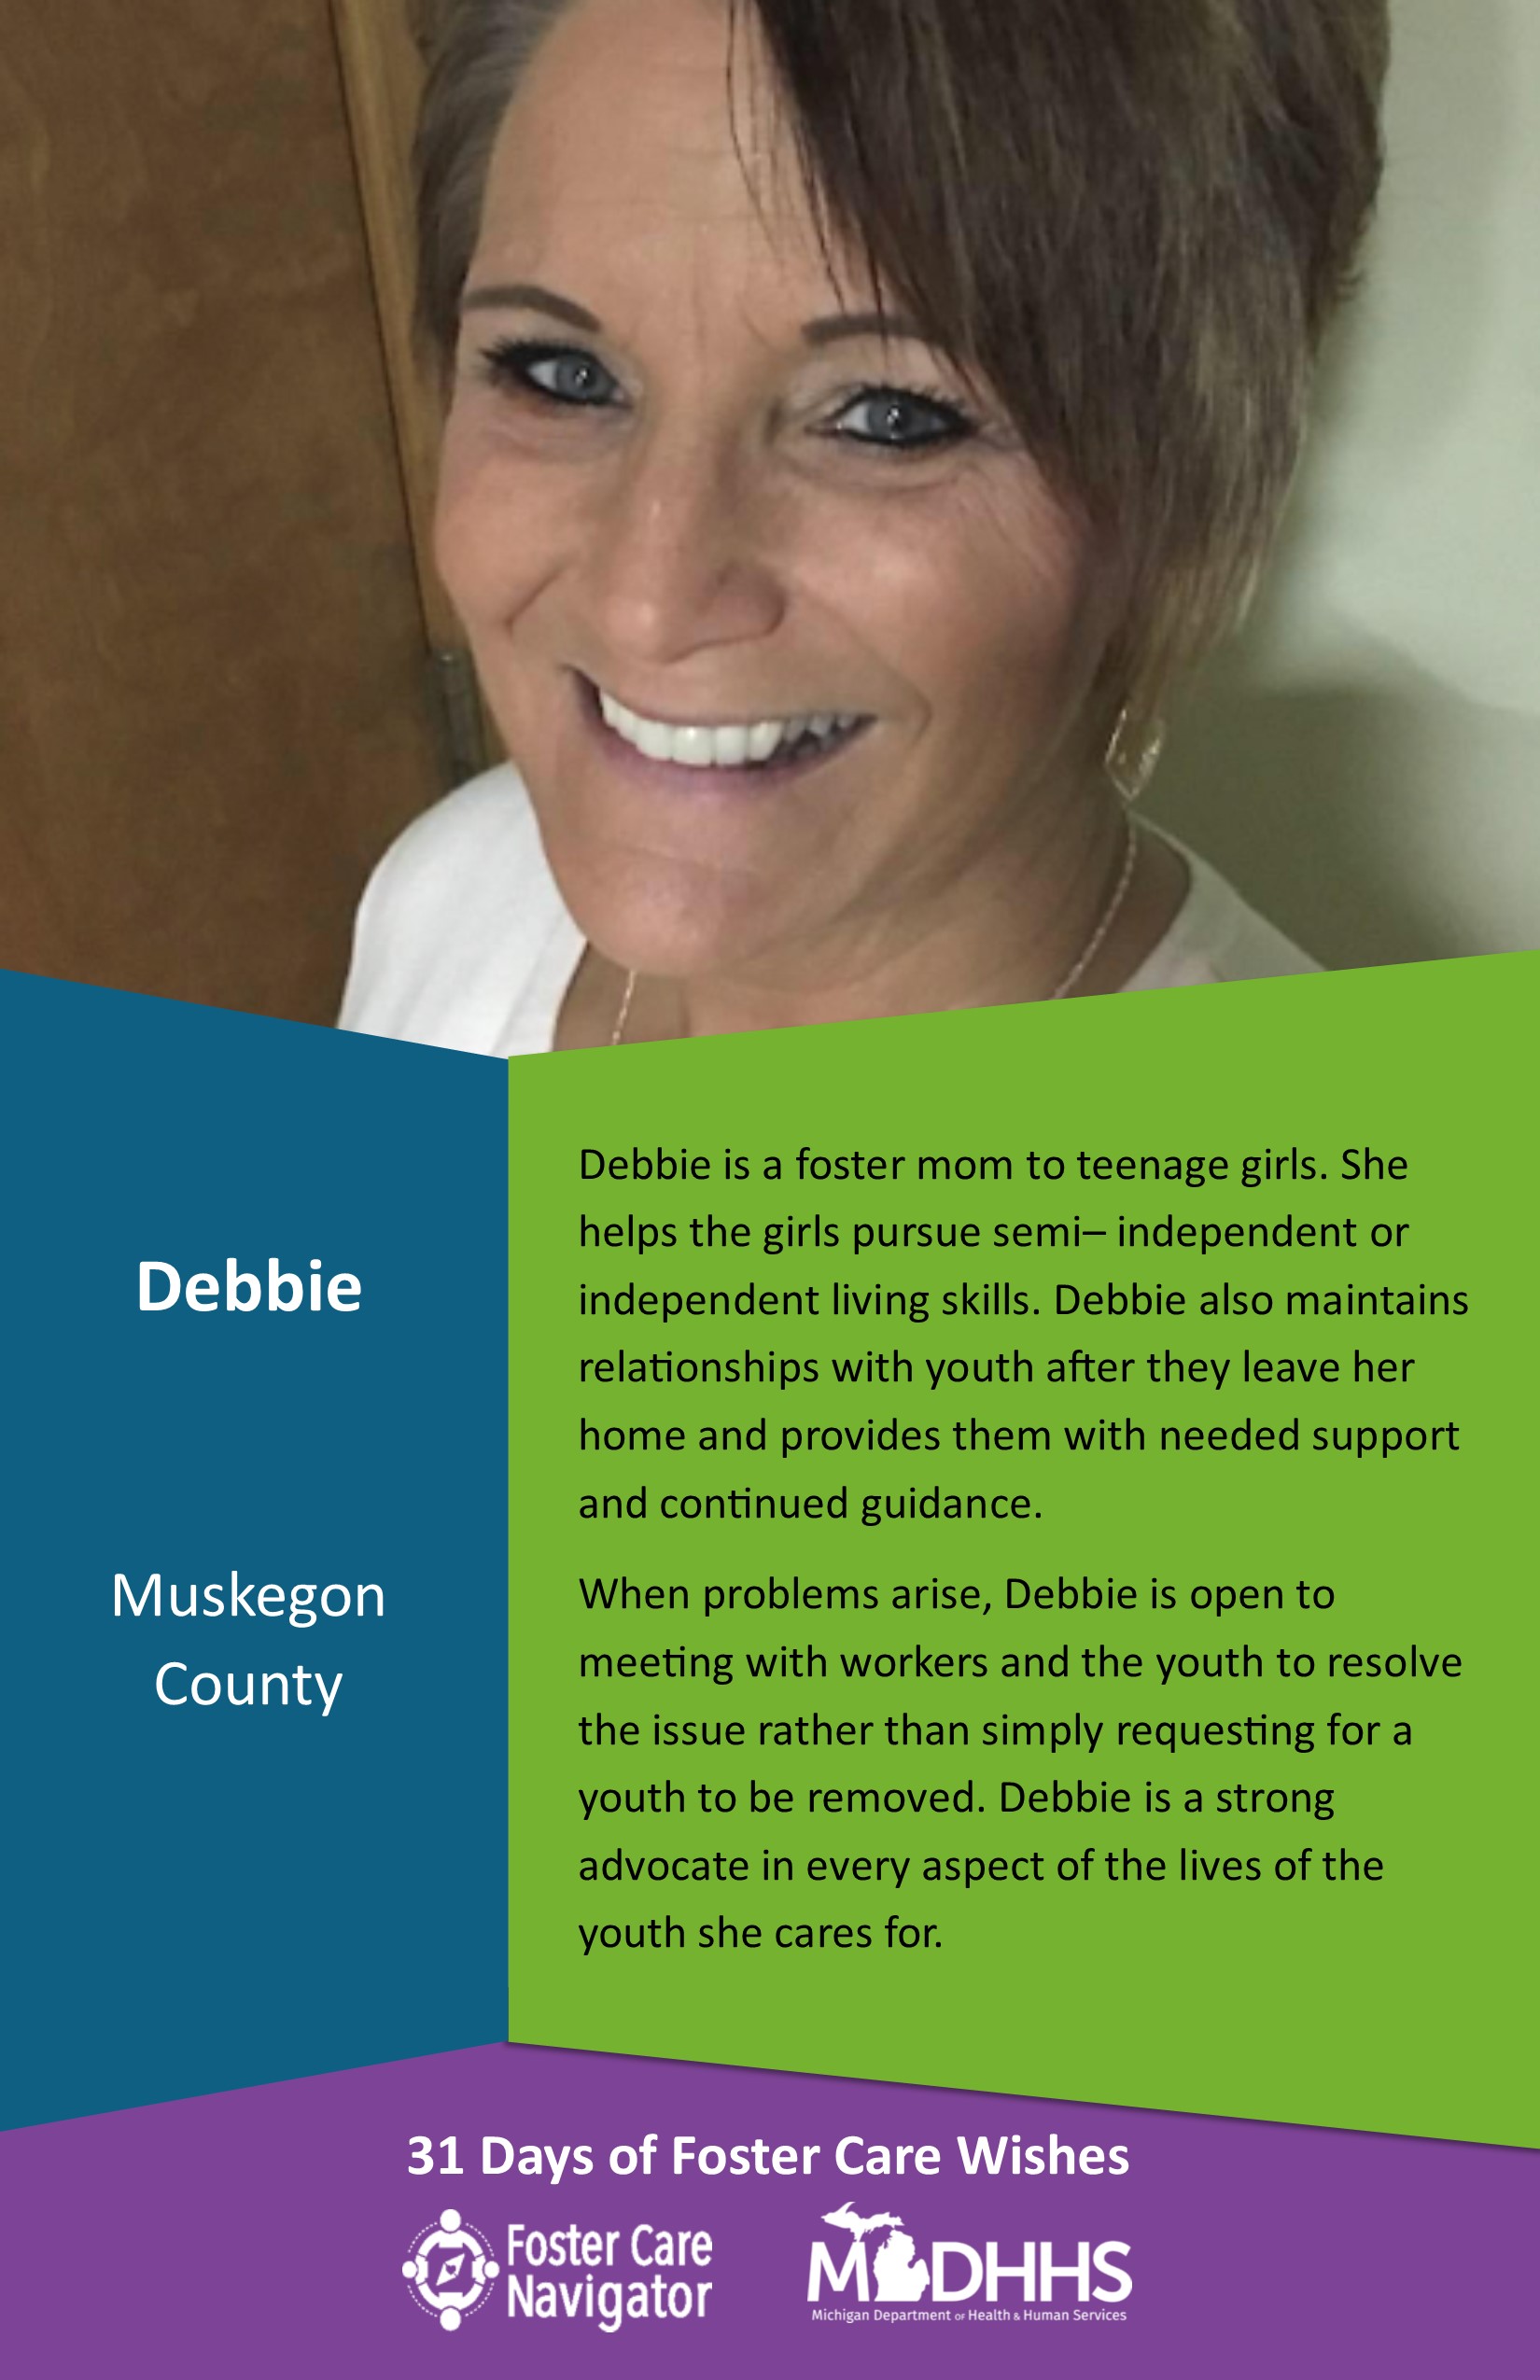 This full page feature includes all of the text listed in the body of this blog post as well as a photo of Debbie. The background is blue on the left, green on the right, and purple at the bottom of the page where the logos are located.